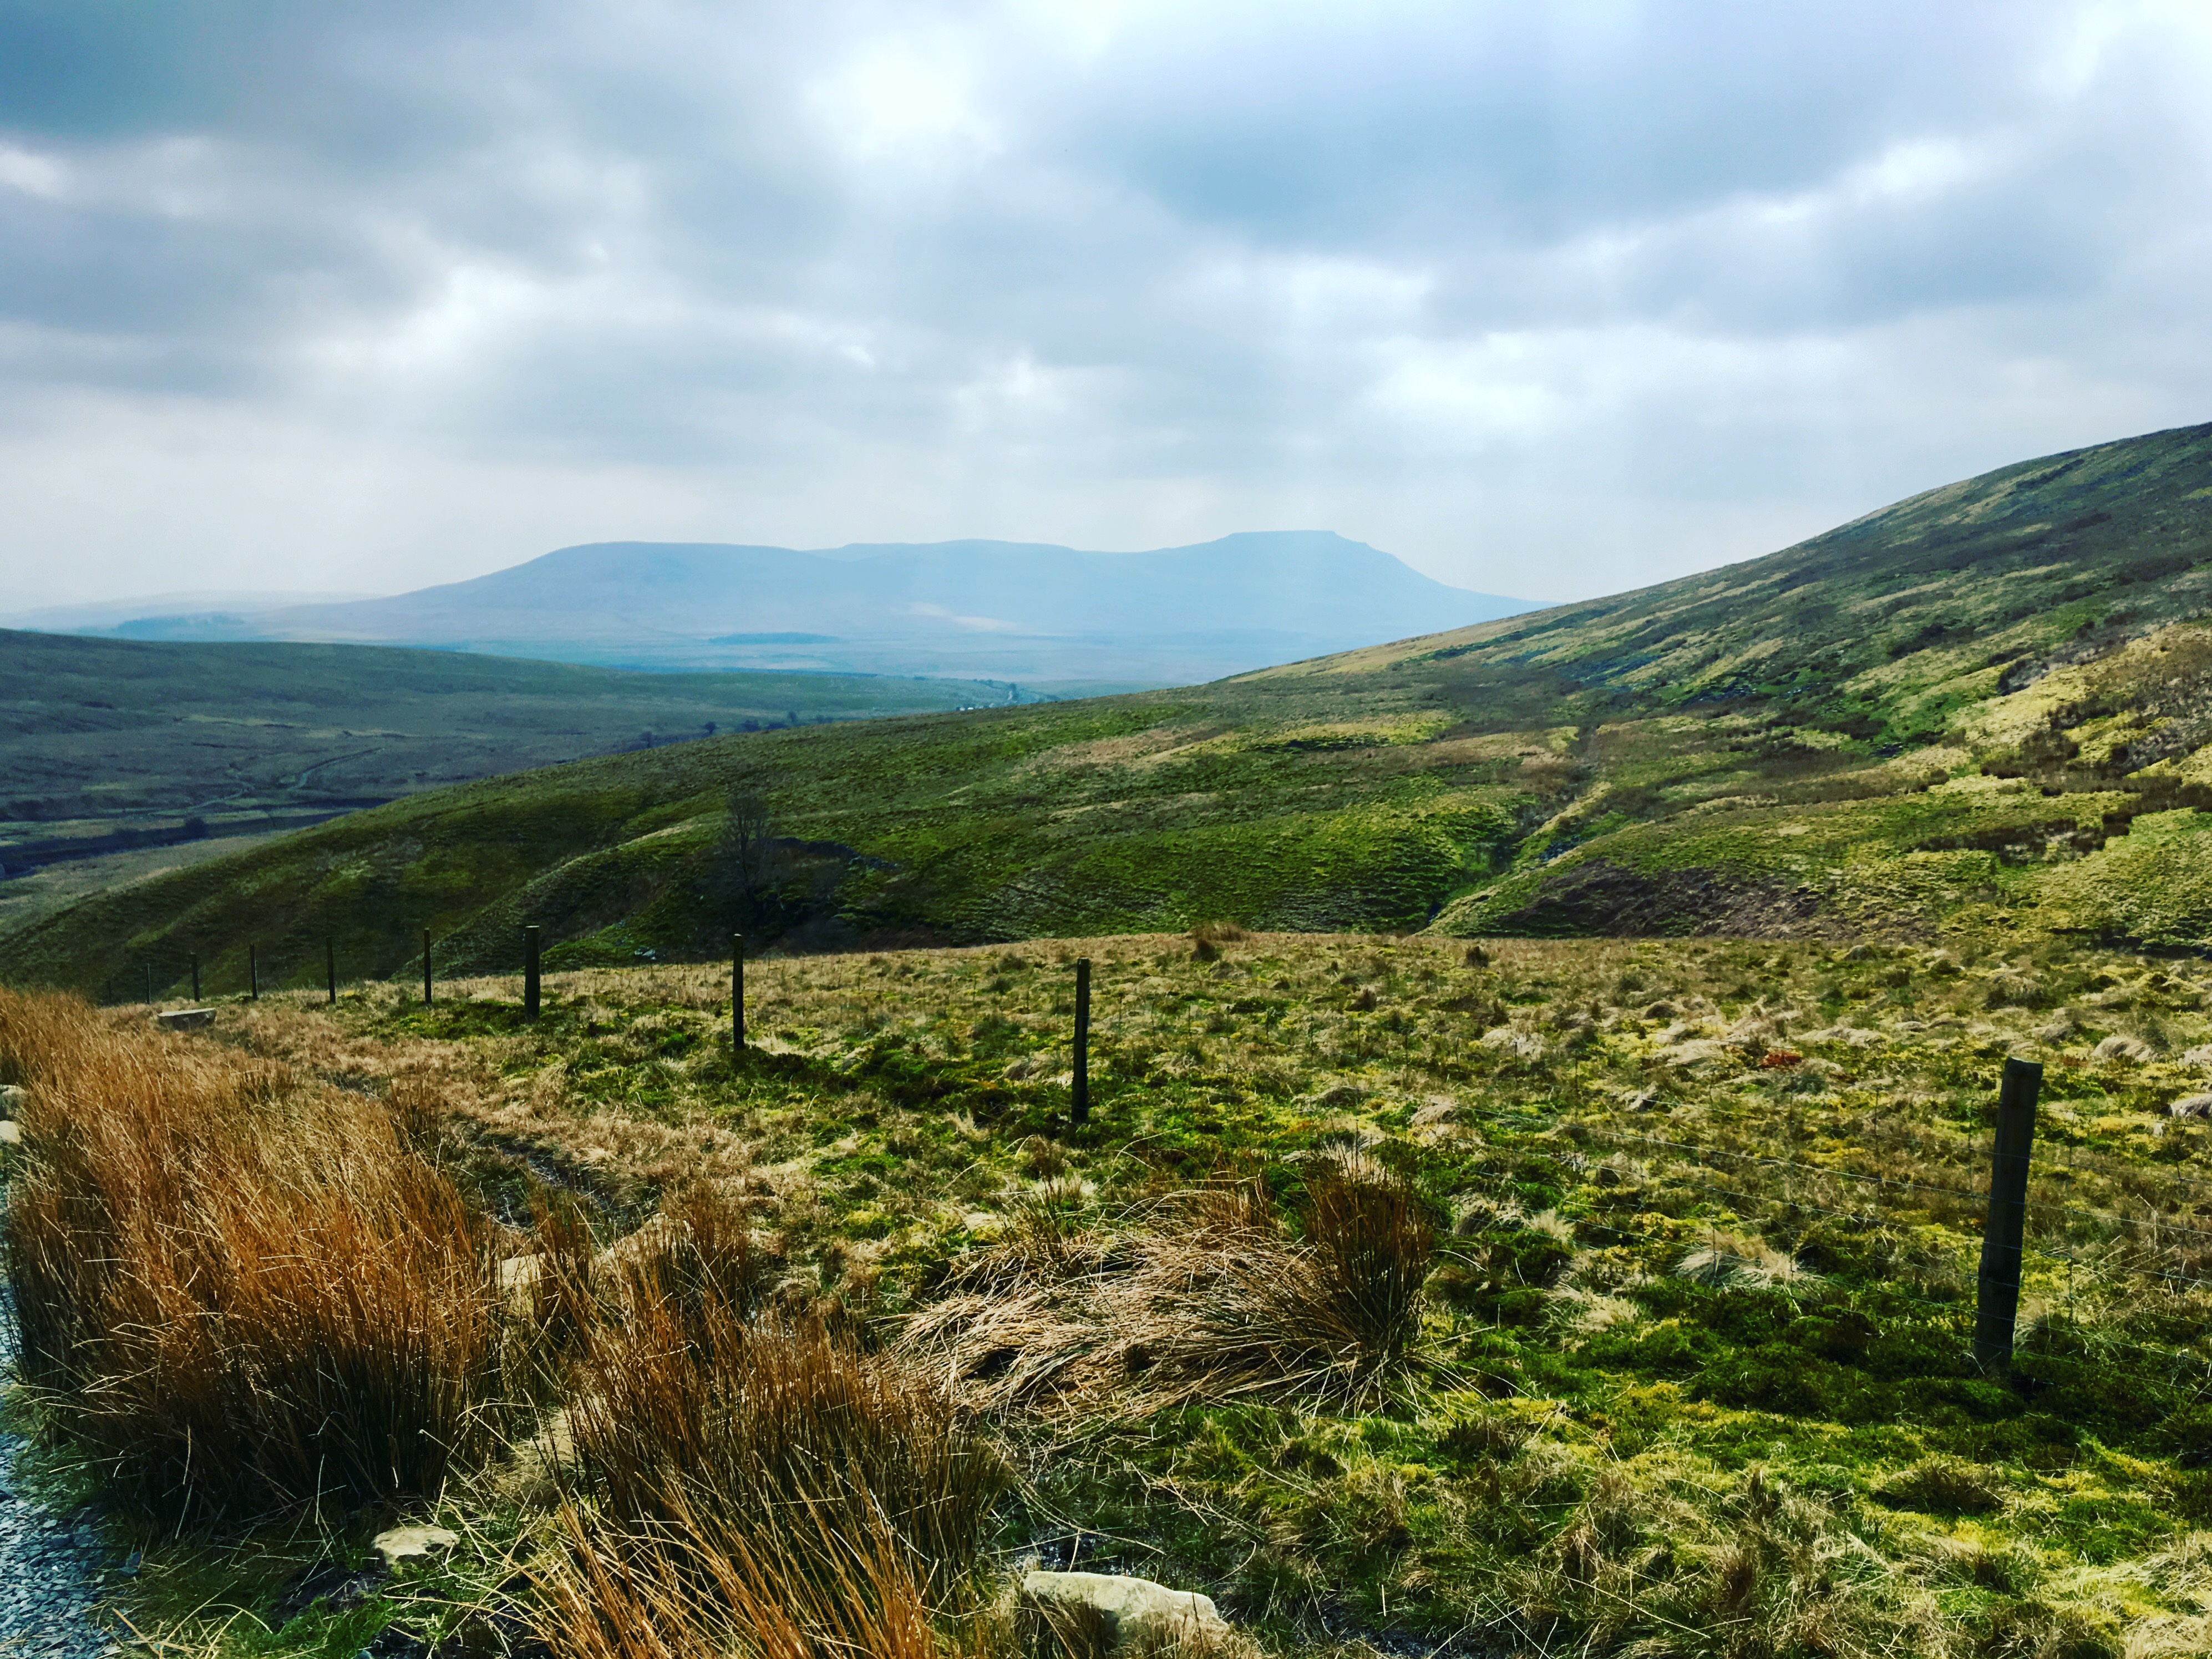 The View from the Descent of Ingleborough 